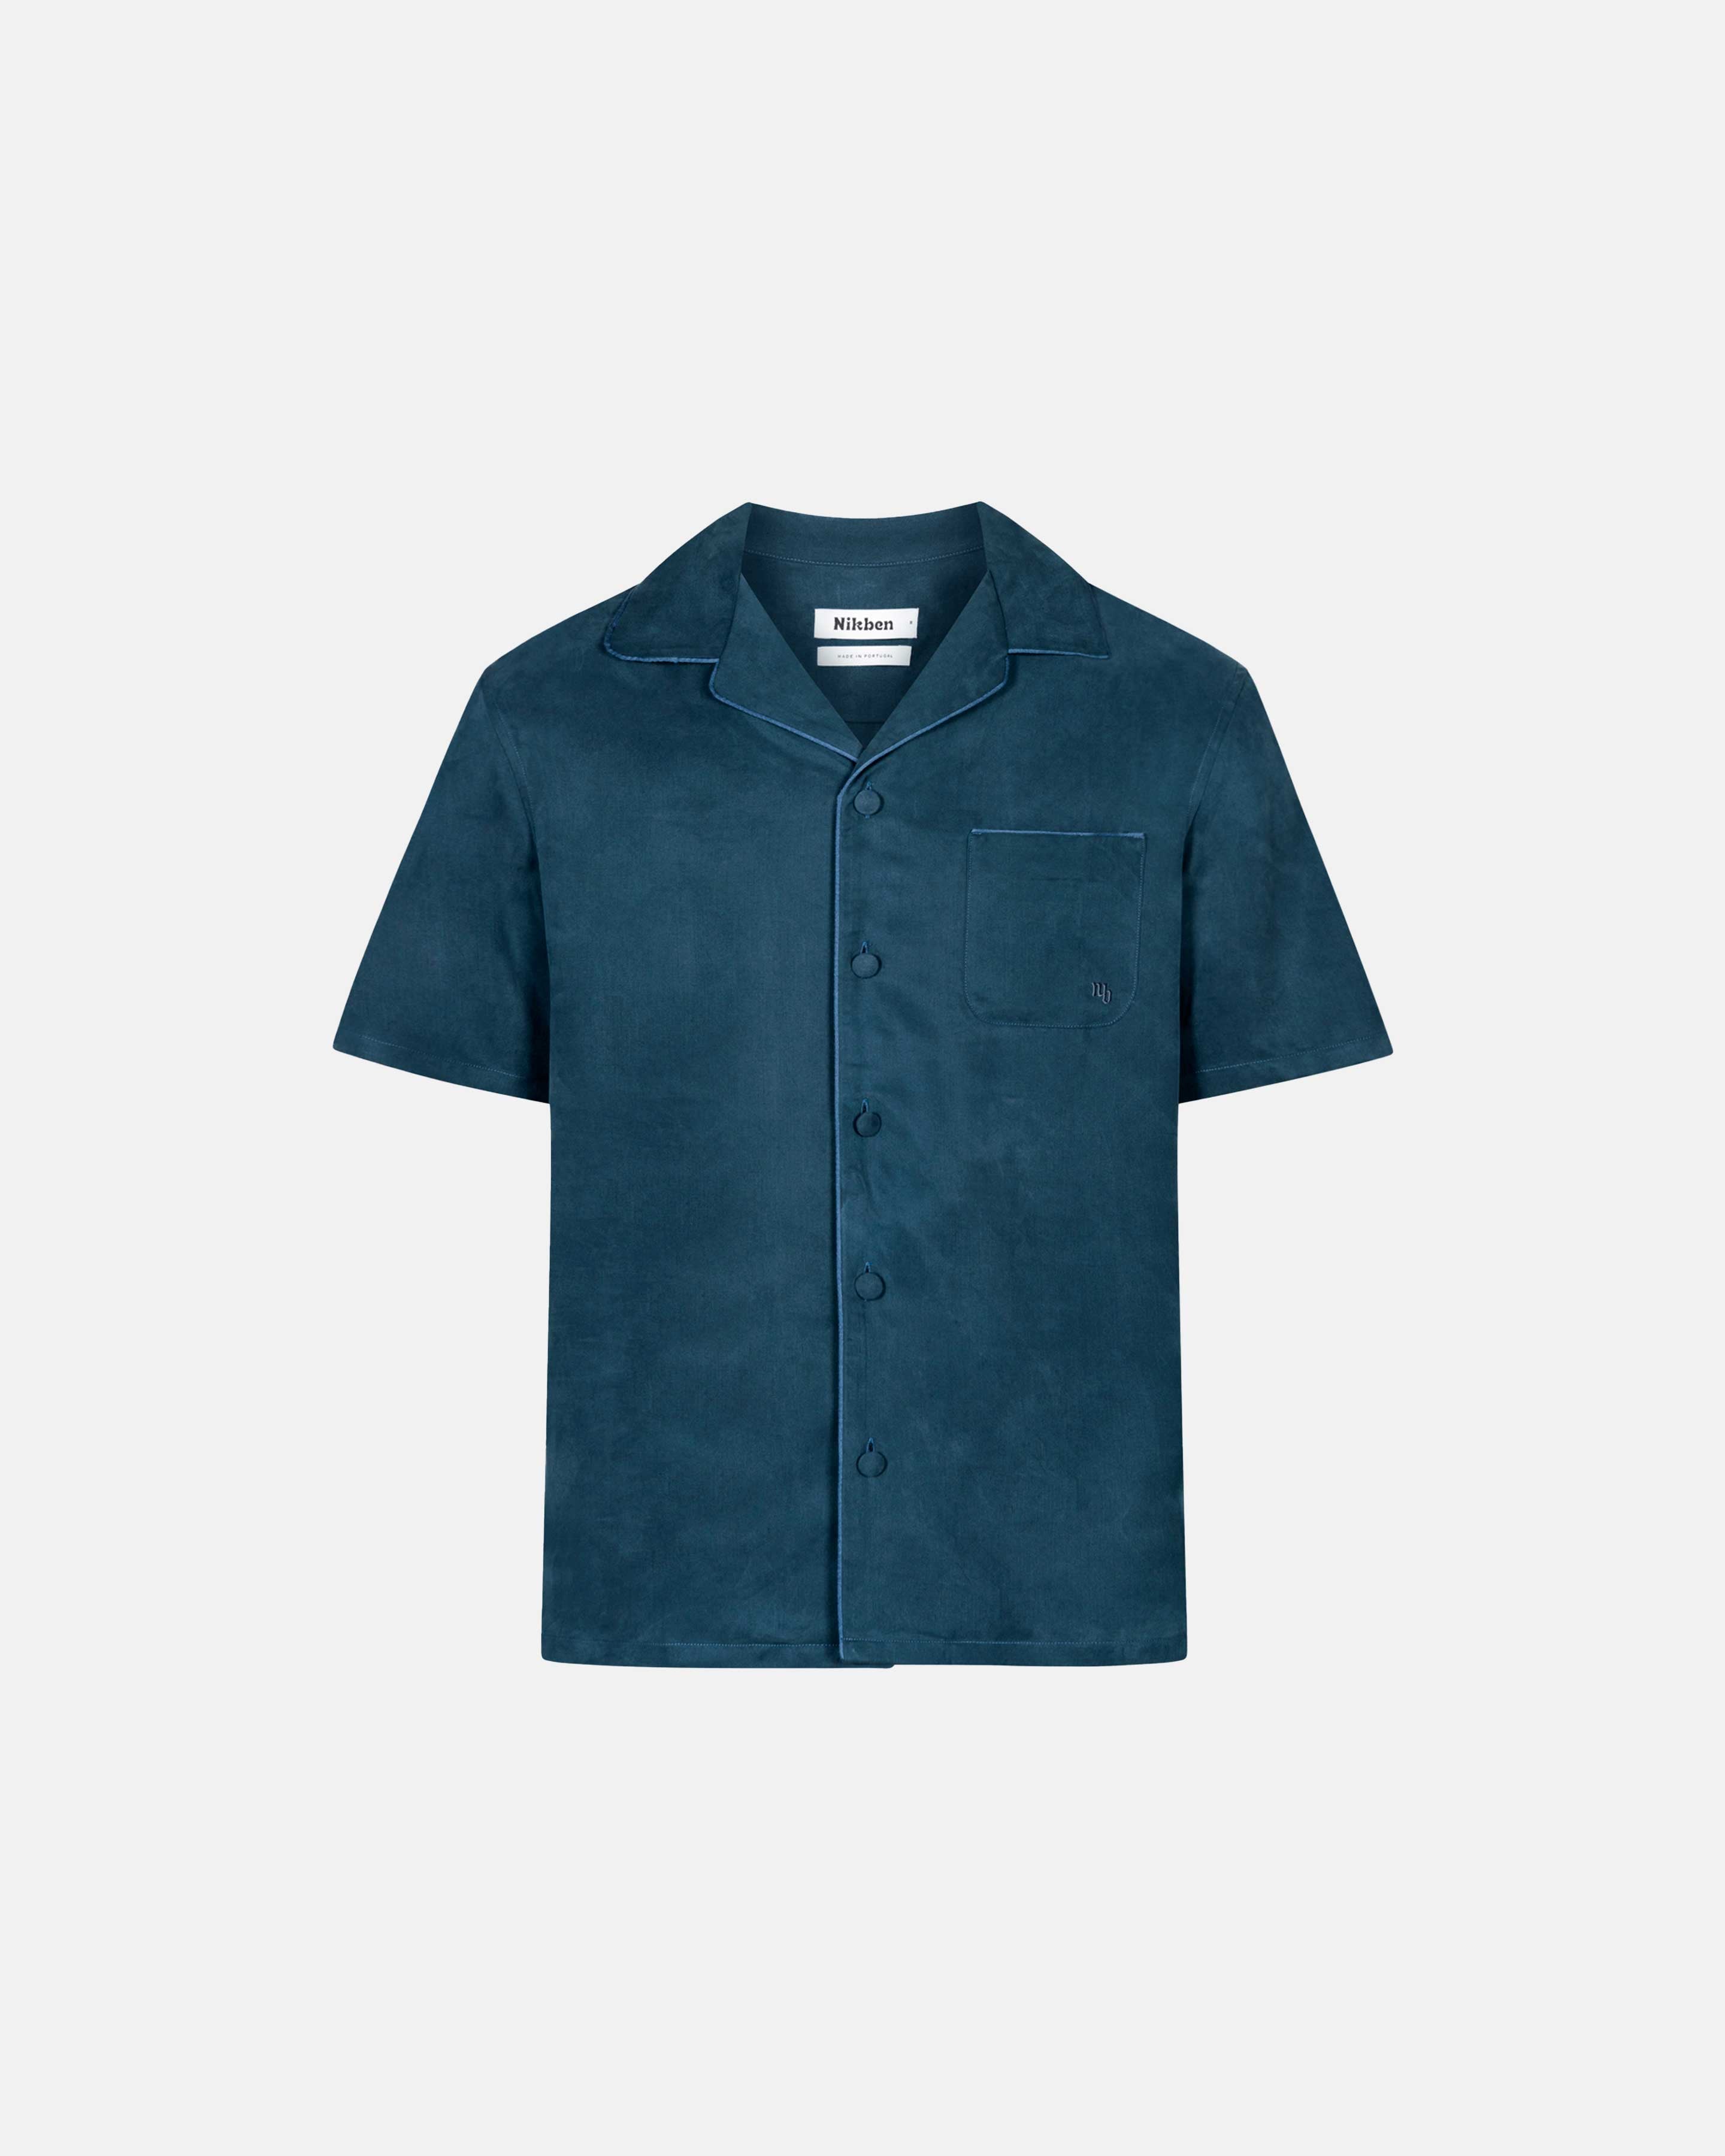 Blue short sleeve shirt with buttons and chest pocket